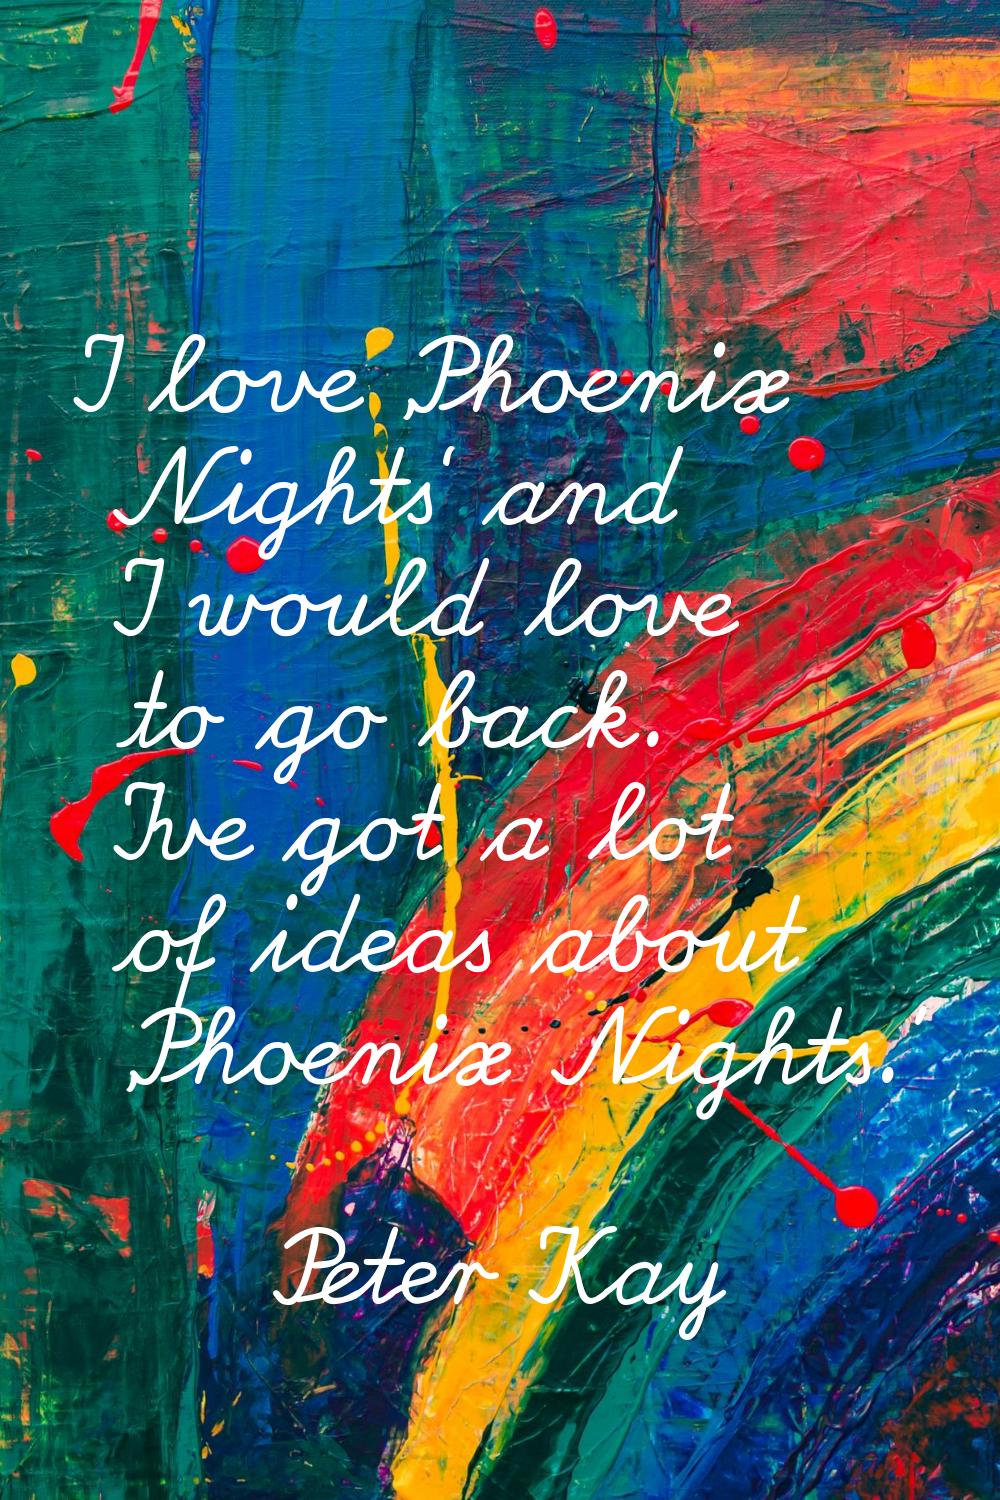 I love 'Phoenix Nights' and I would love to go back. I've got a lot of ideas about 'Phoenix Nights.